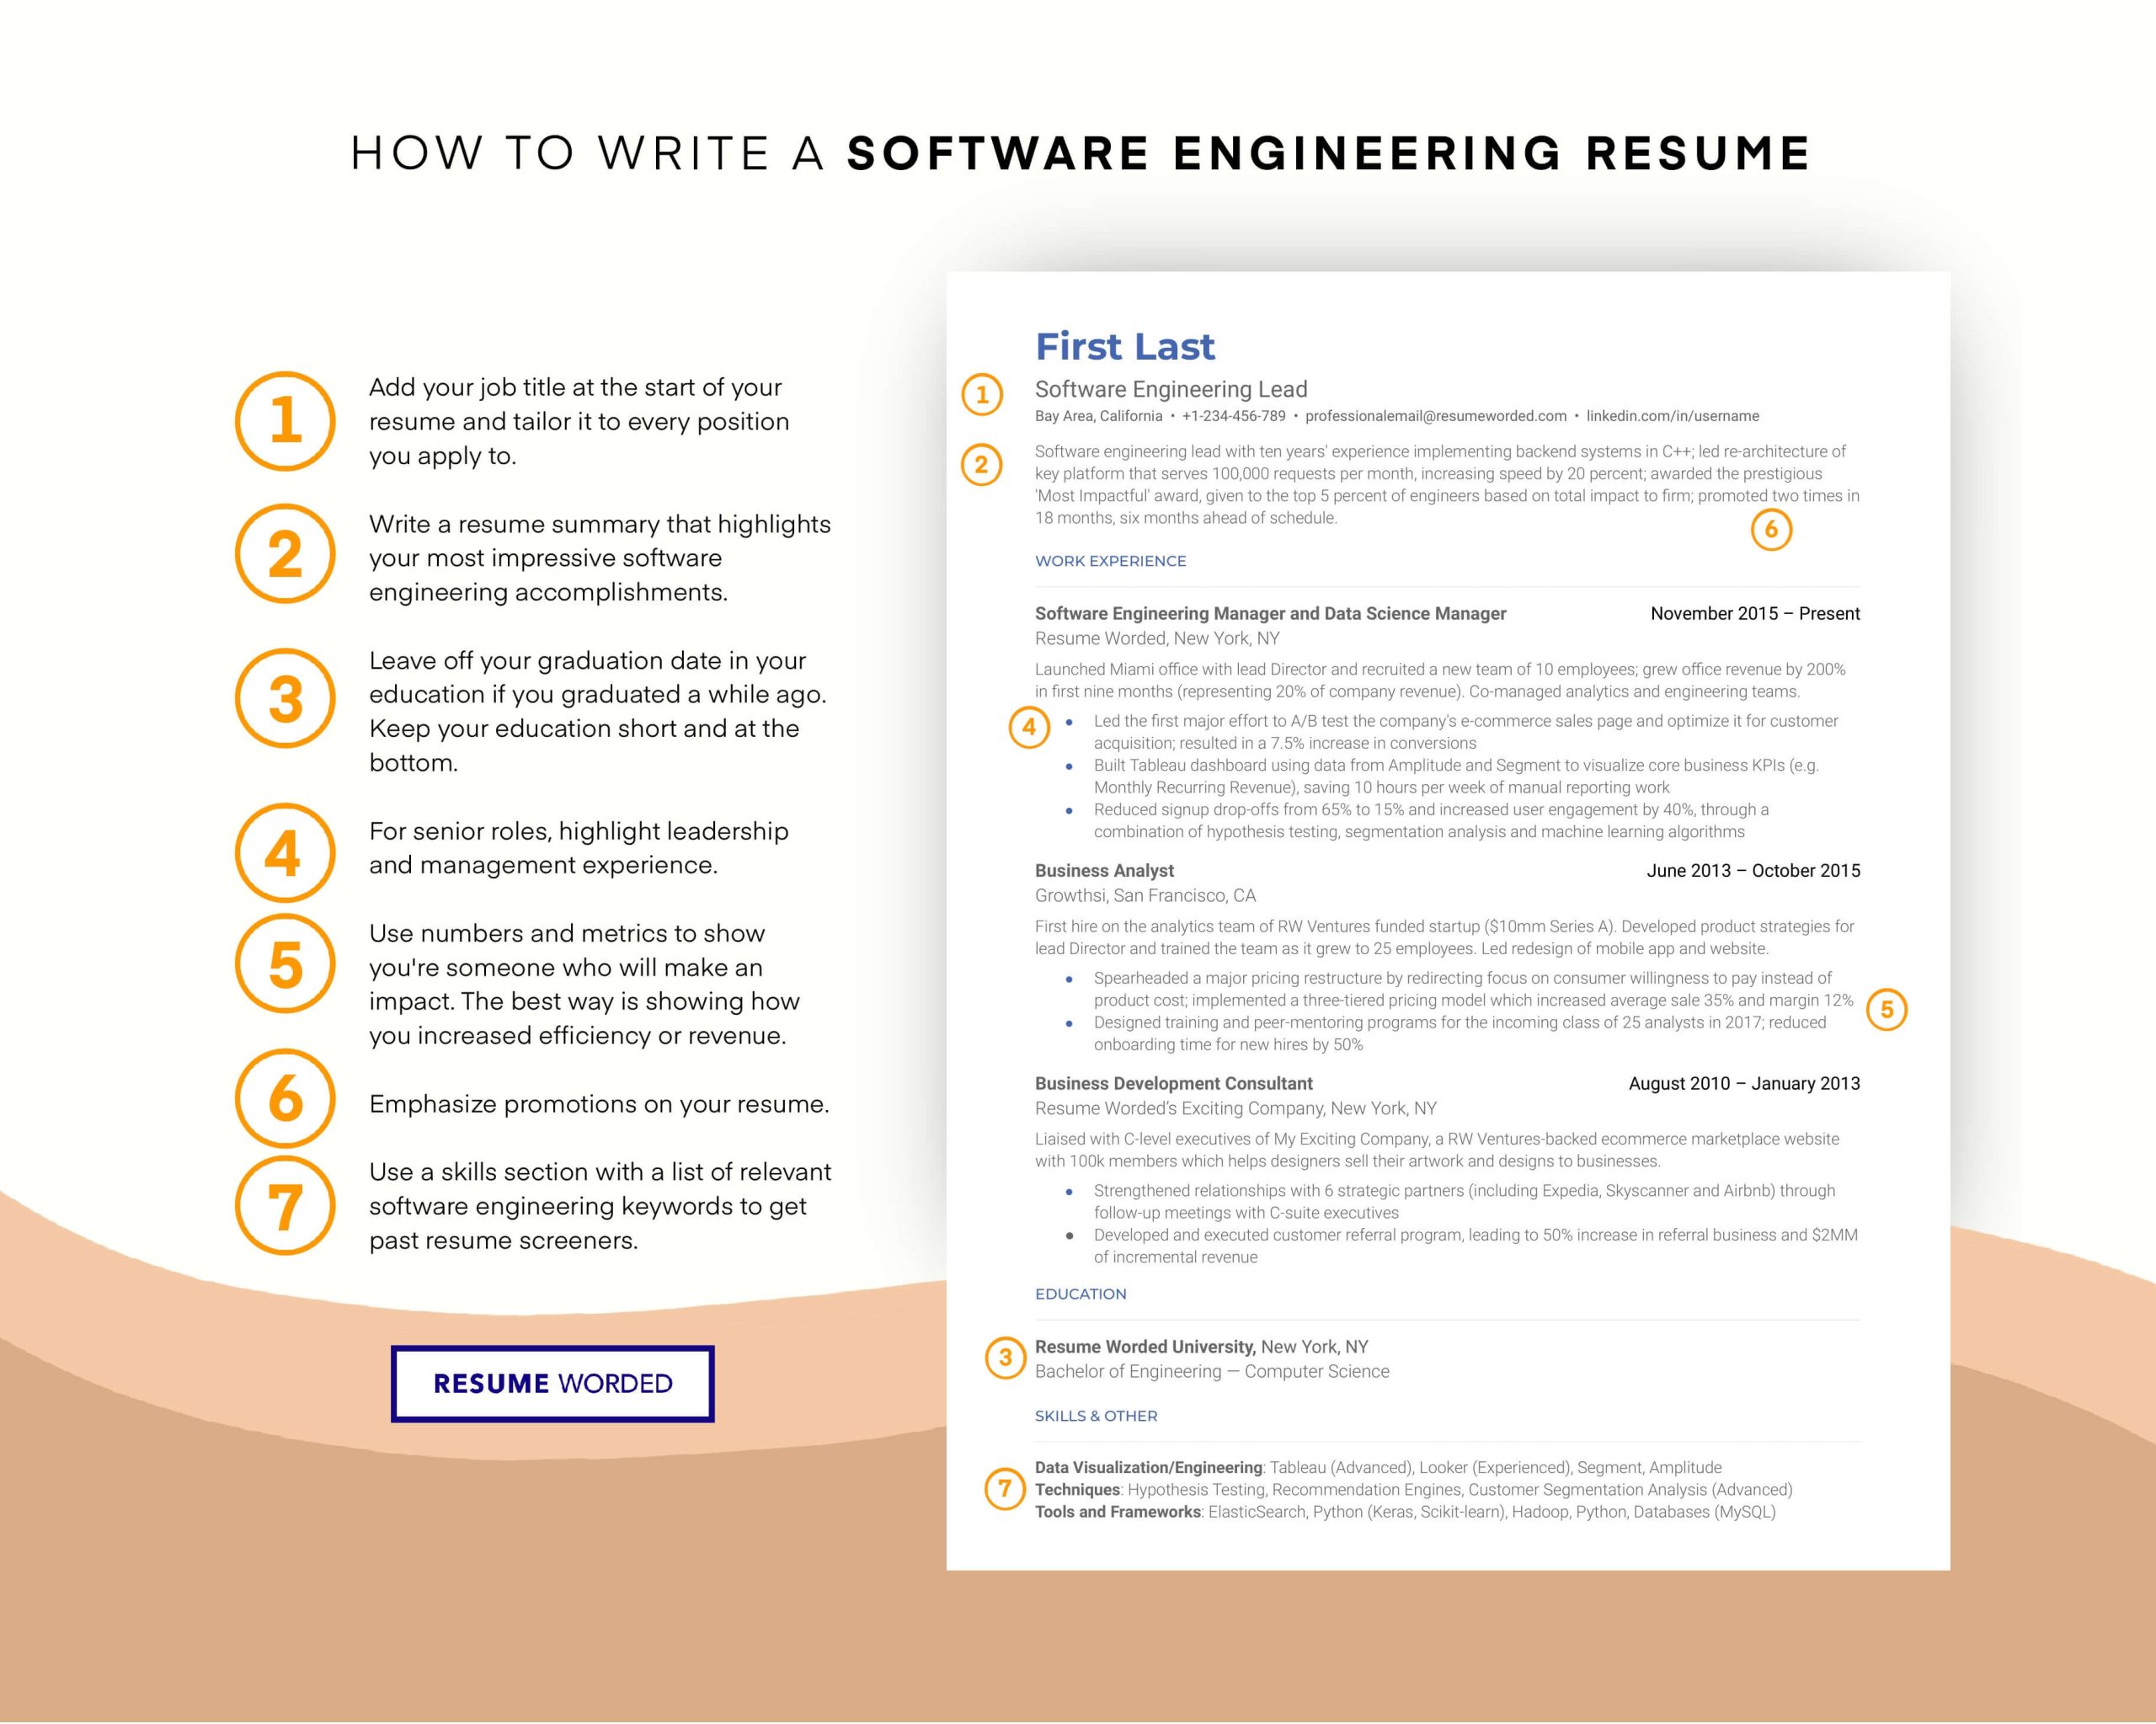 Development Engineer with Npd Resume Samples Resume Skills and Keywords for Product Development Engineer …